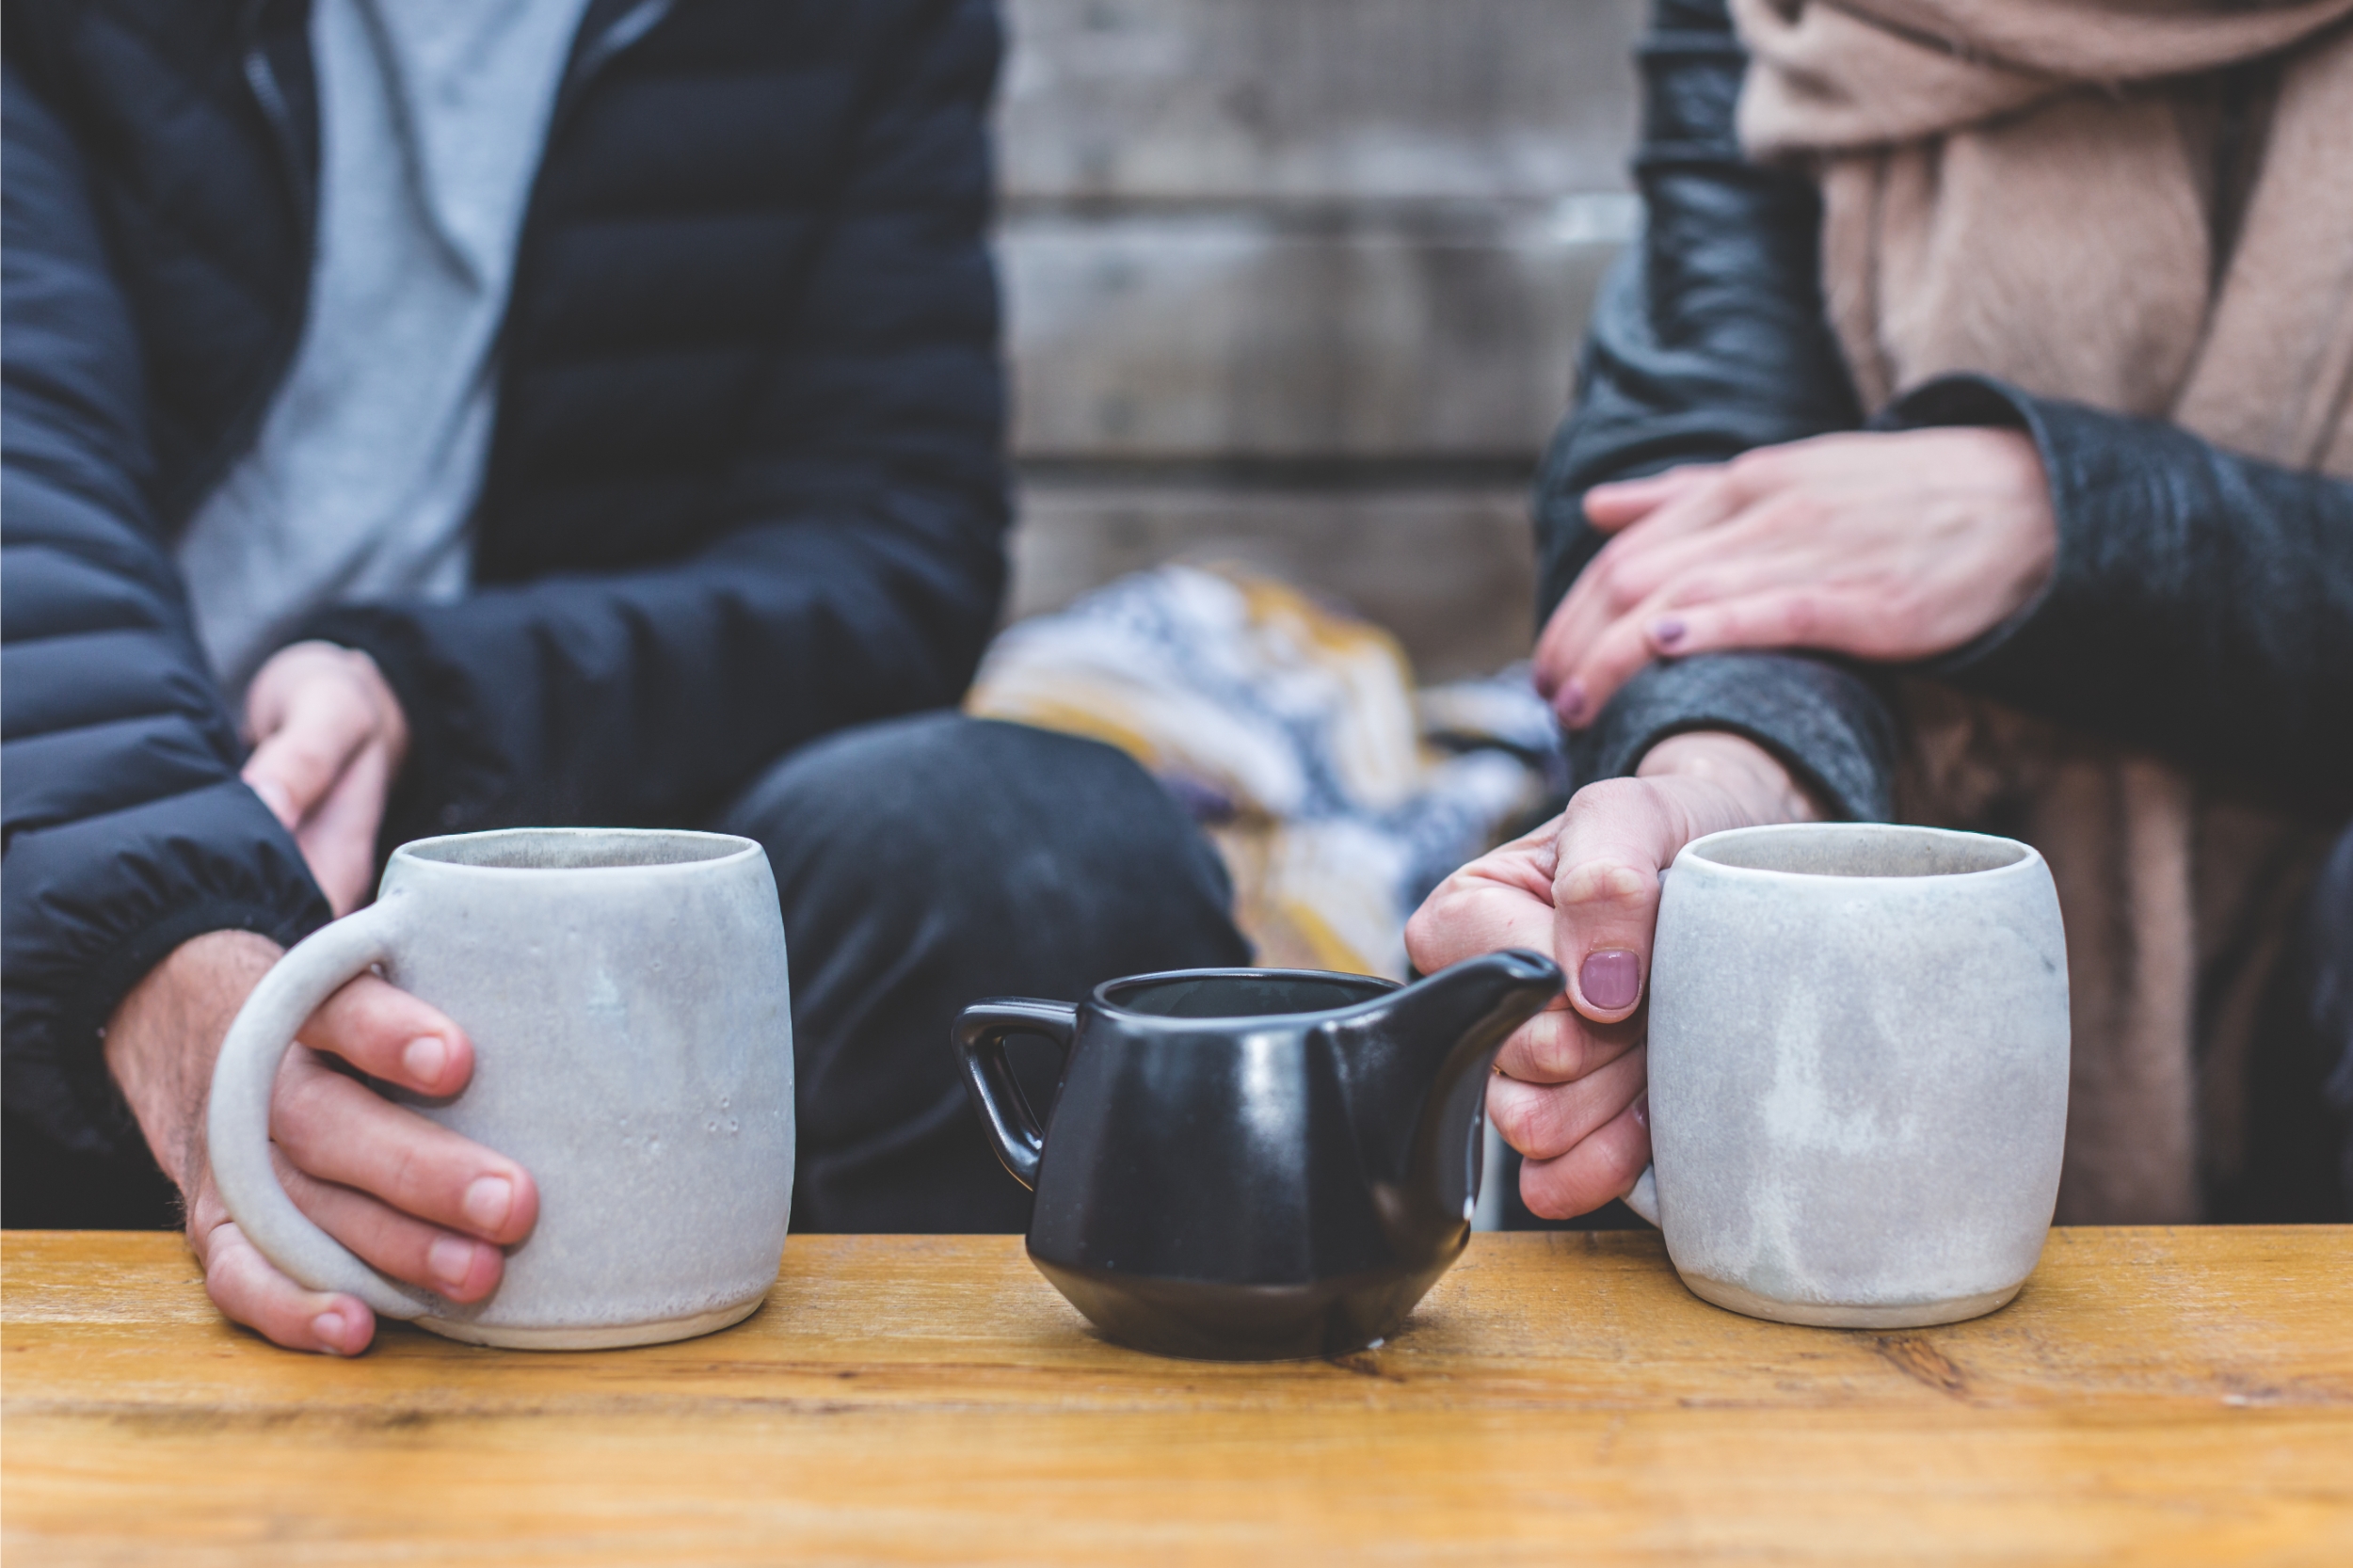 Two people sat on a bench outside with a mug in their hands and a black teapot in the middle.